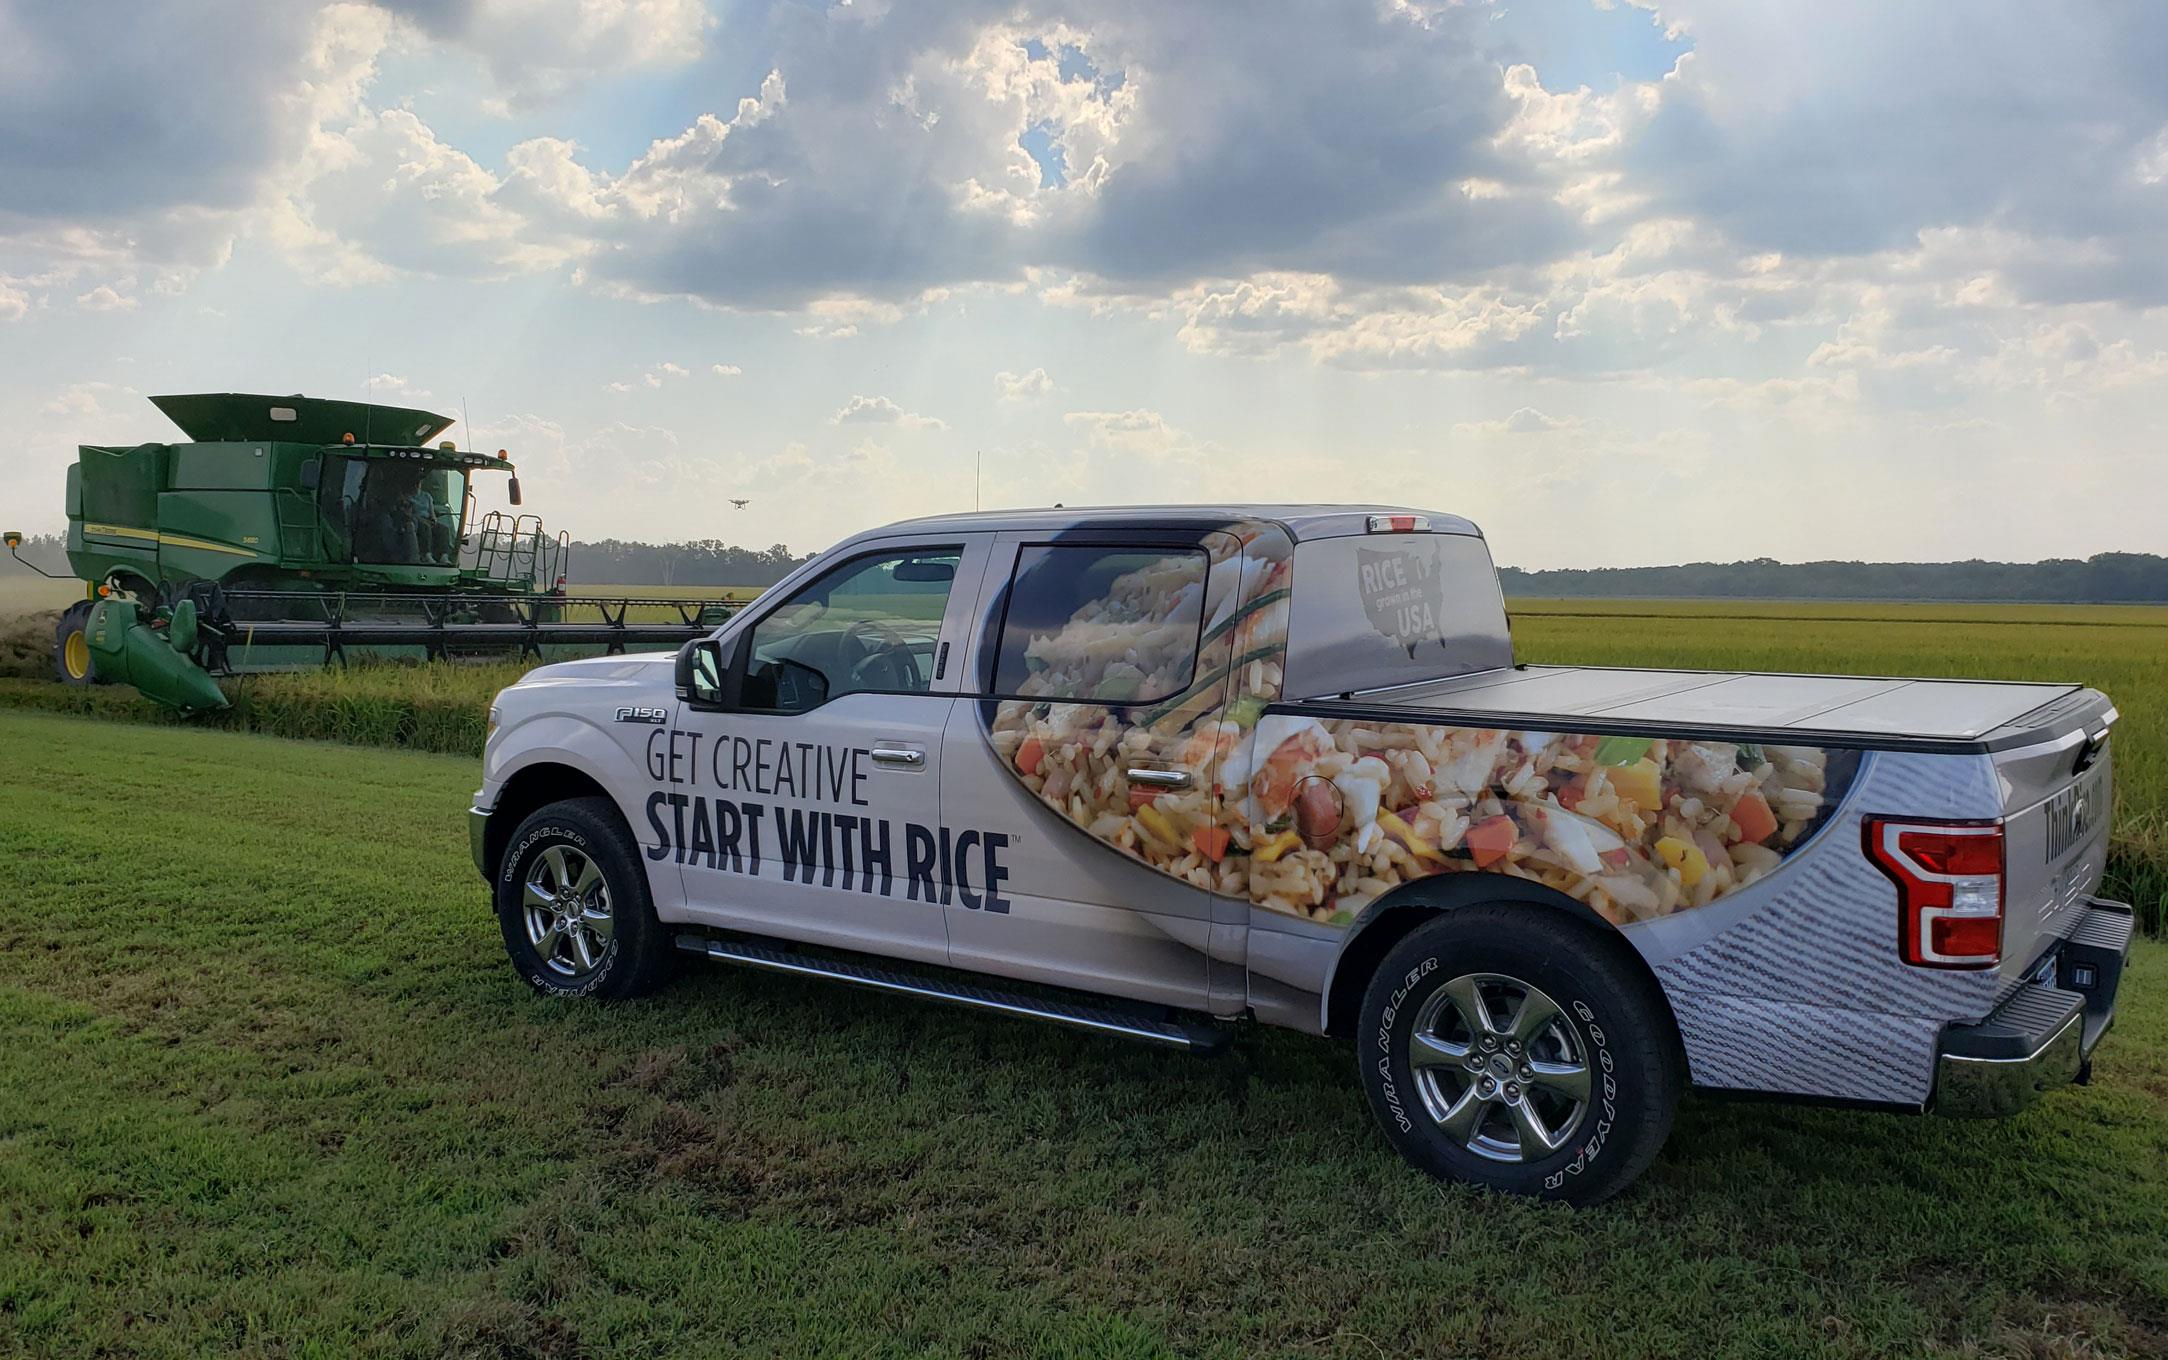 https://www.usarice.com/images/default-source/usa-rice-daily-images/domestic-promotion/dp-w-2019-think-rice-truck--shiny-sky-190925.jpg